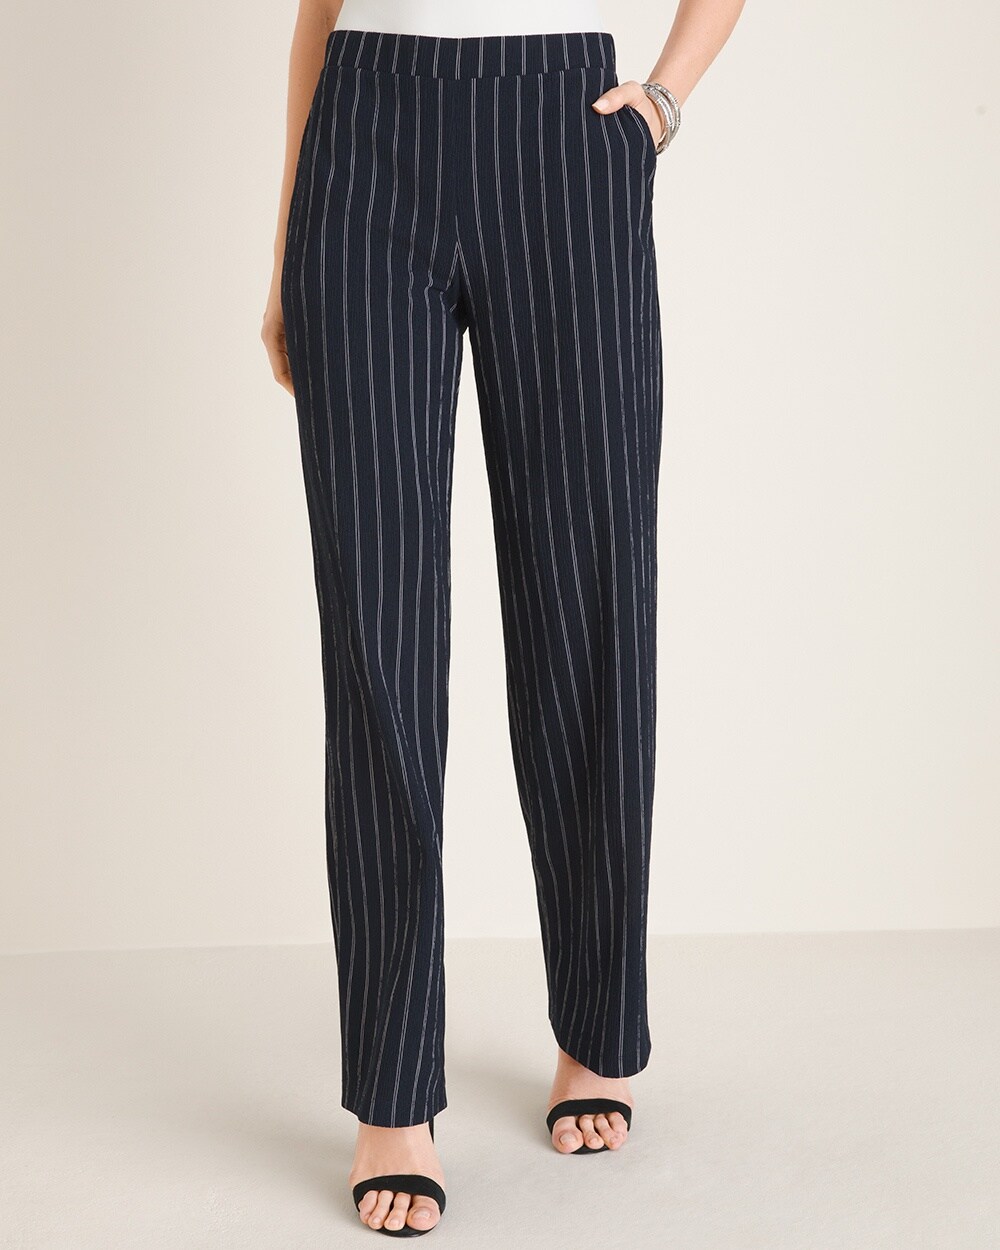 Travelers Collection Modern Texture Pinstriped Pants